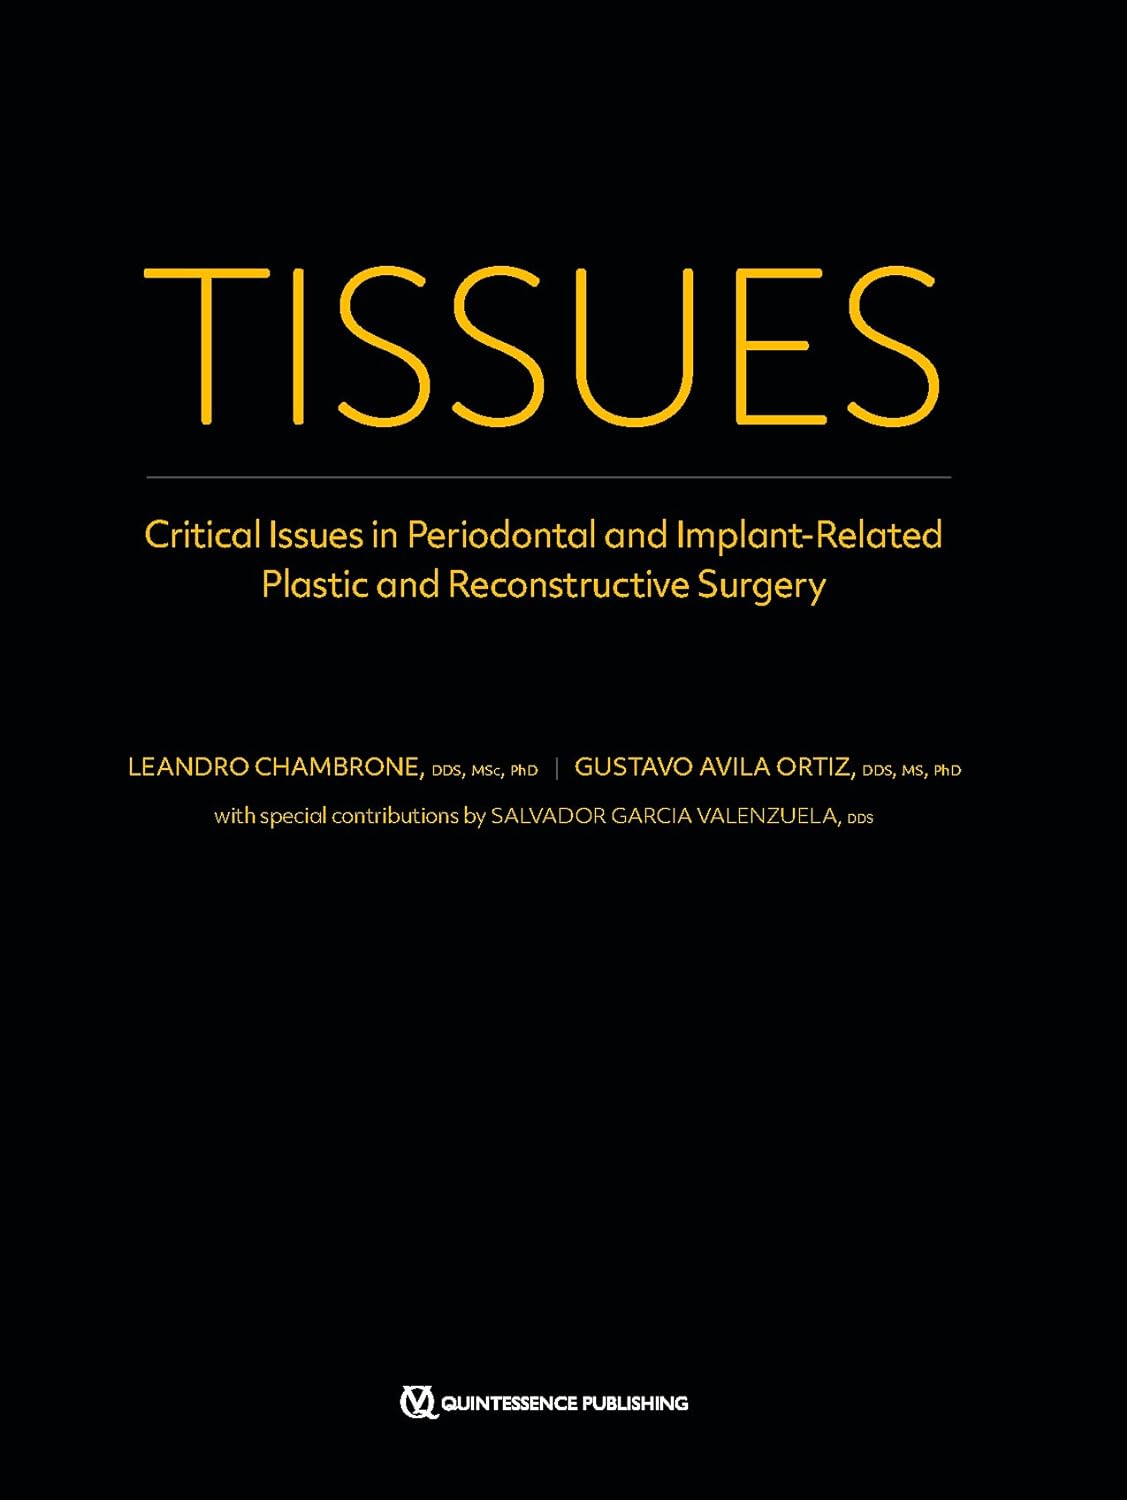 TISSUES: Critical Issues in Periodontal and Implant-Related Plastic and Reconstructive Surgery